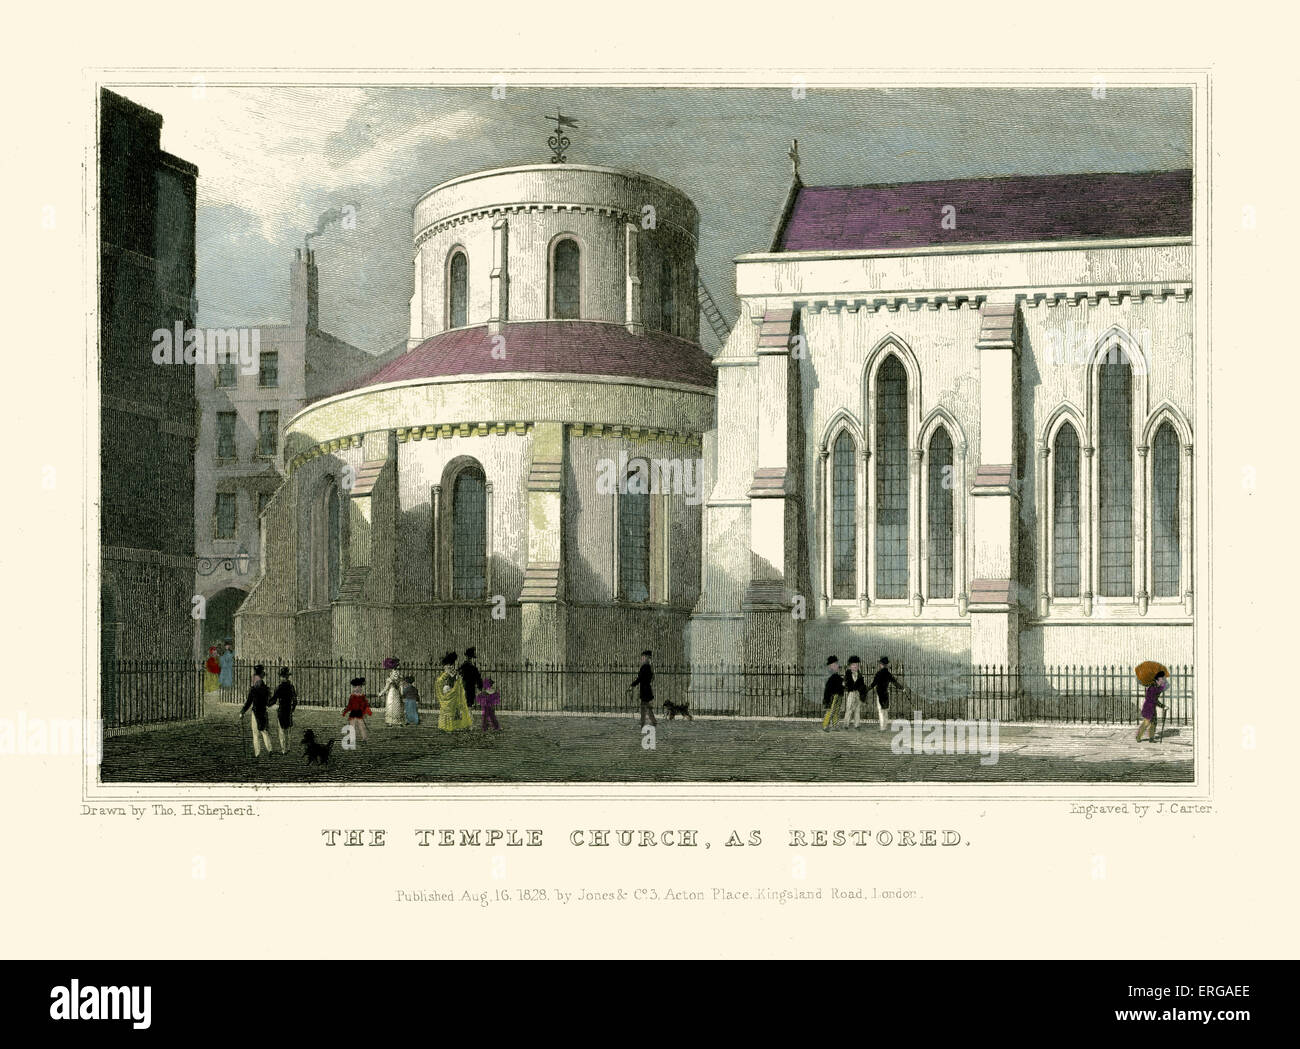 London Views:  The Temple Church, as restored.  Drawn by Thomas Hosmer Shepherd 1792 – 1864. Engraved by J. Carter. Published Stock Photo